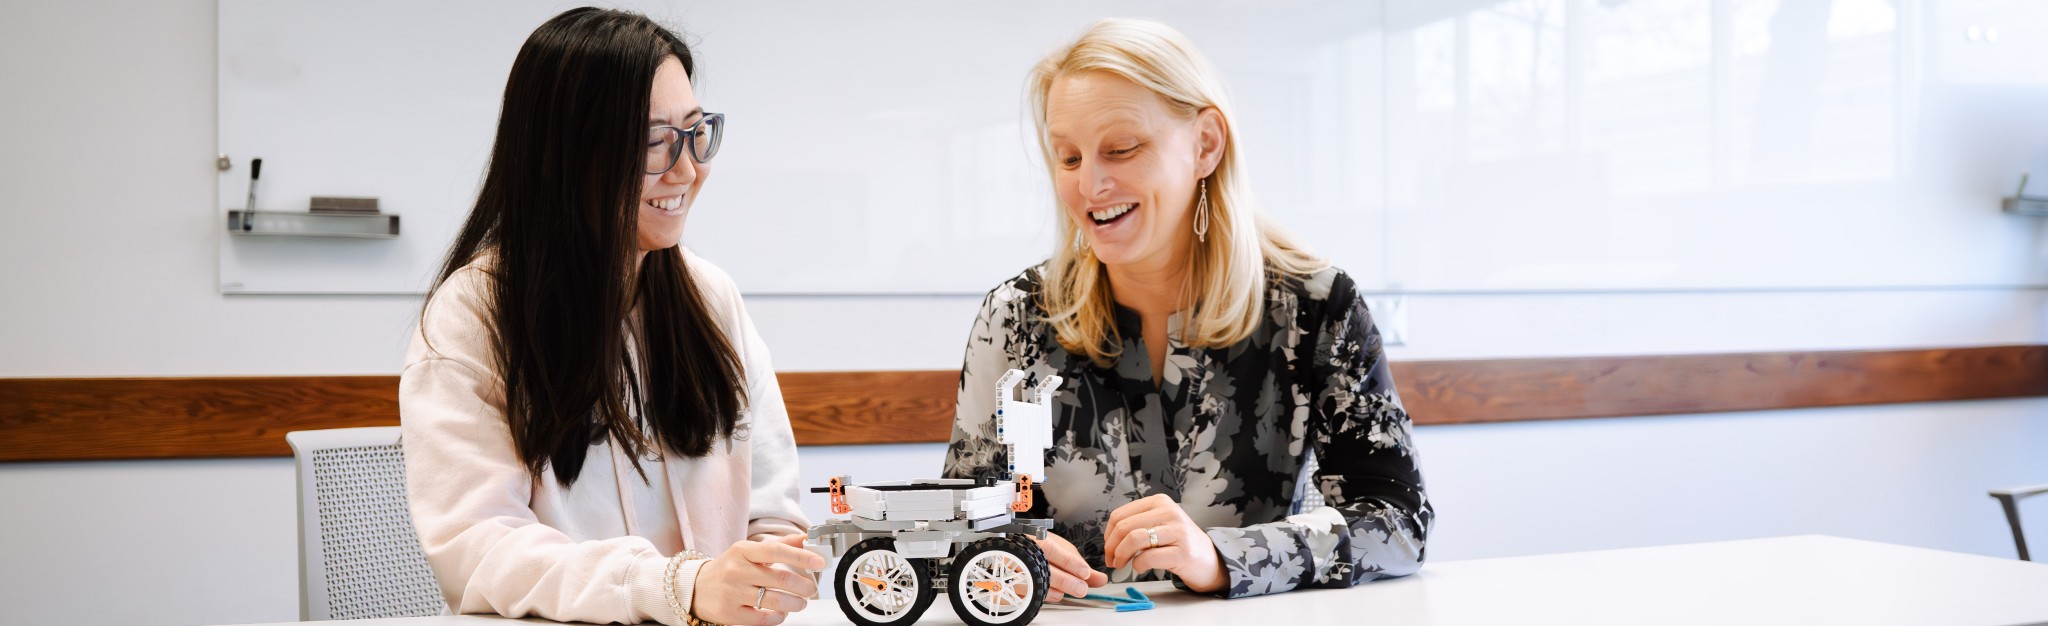 Two women teaching using a small robot on a small table